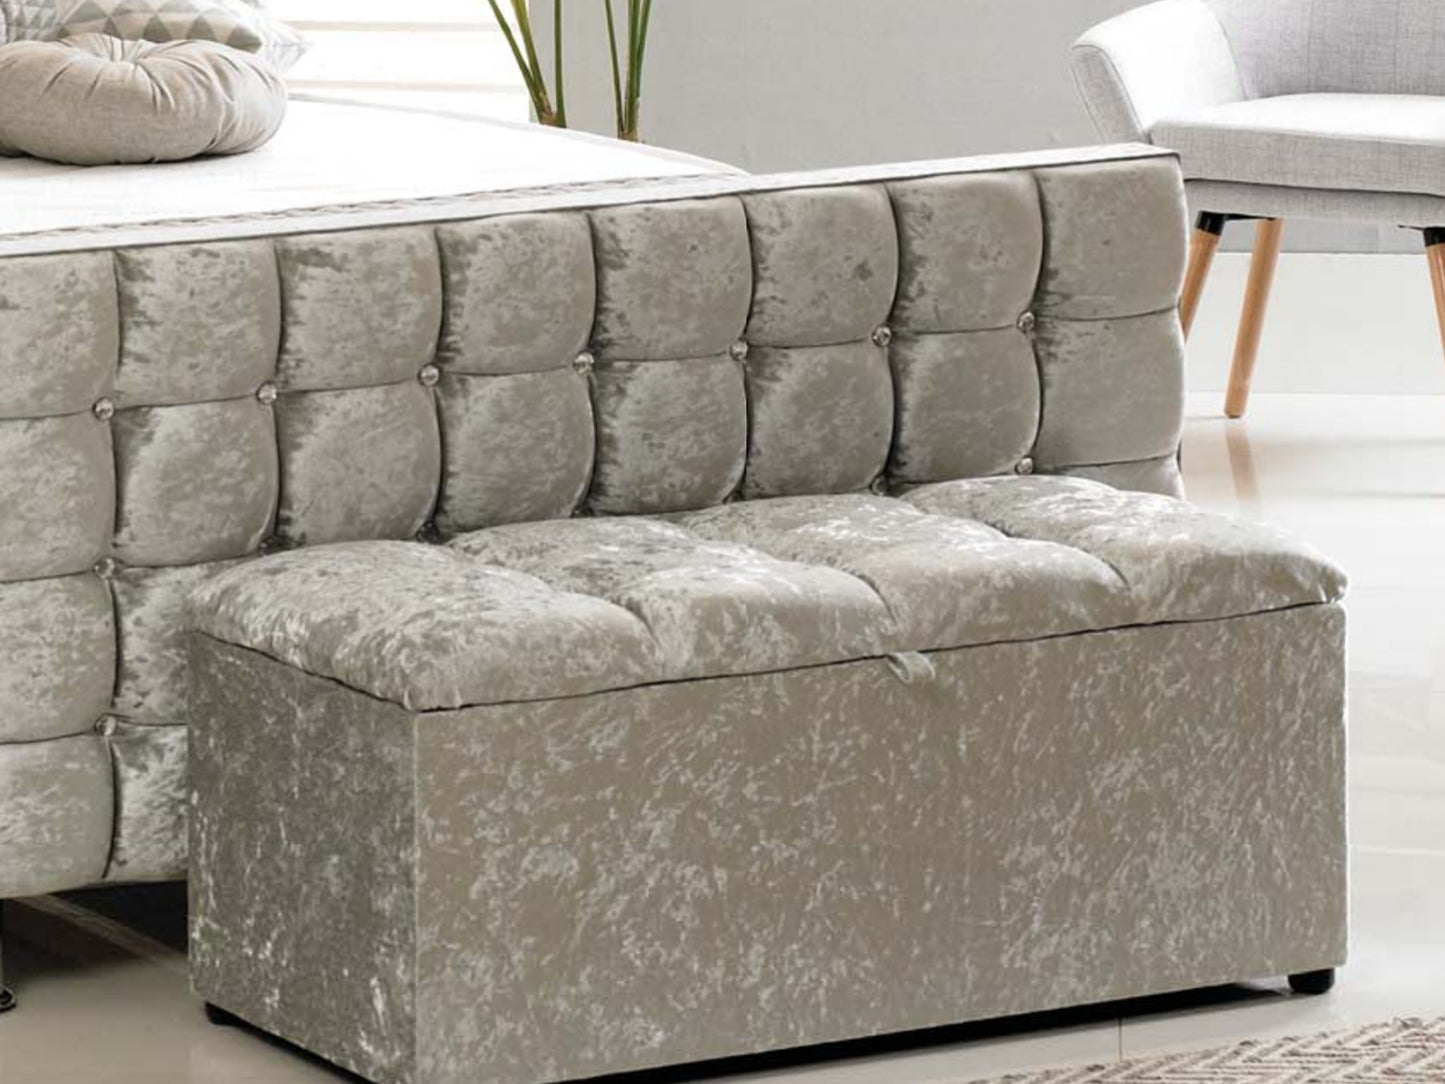 Kensington Luxury Bed Frame in Crushed Silver